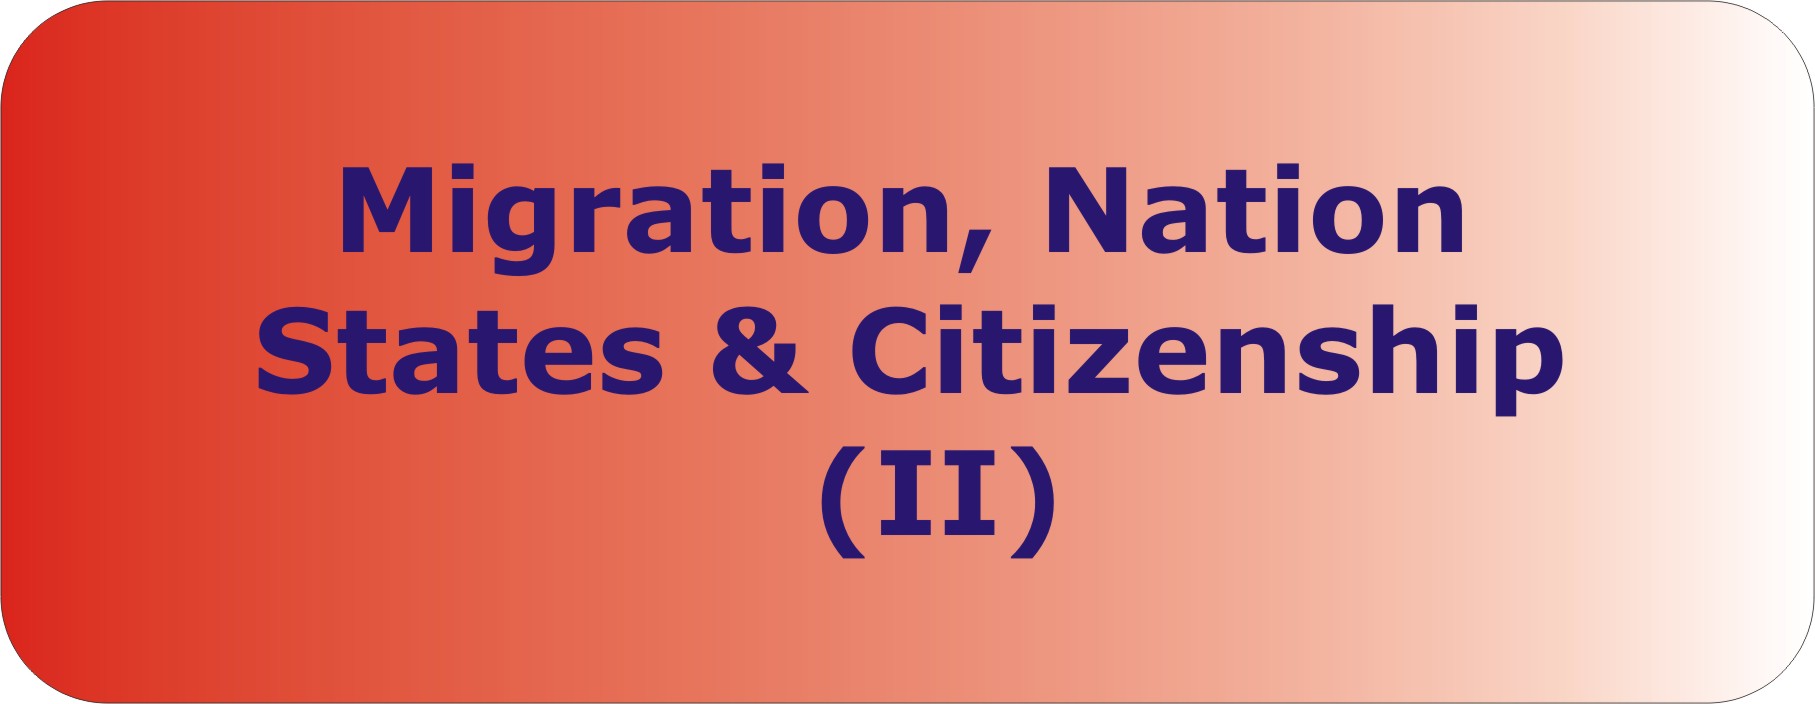 Migration, Nation States and Citizenship (II)